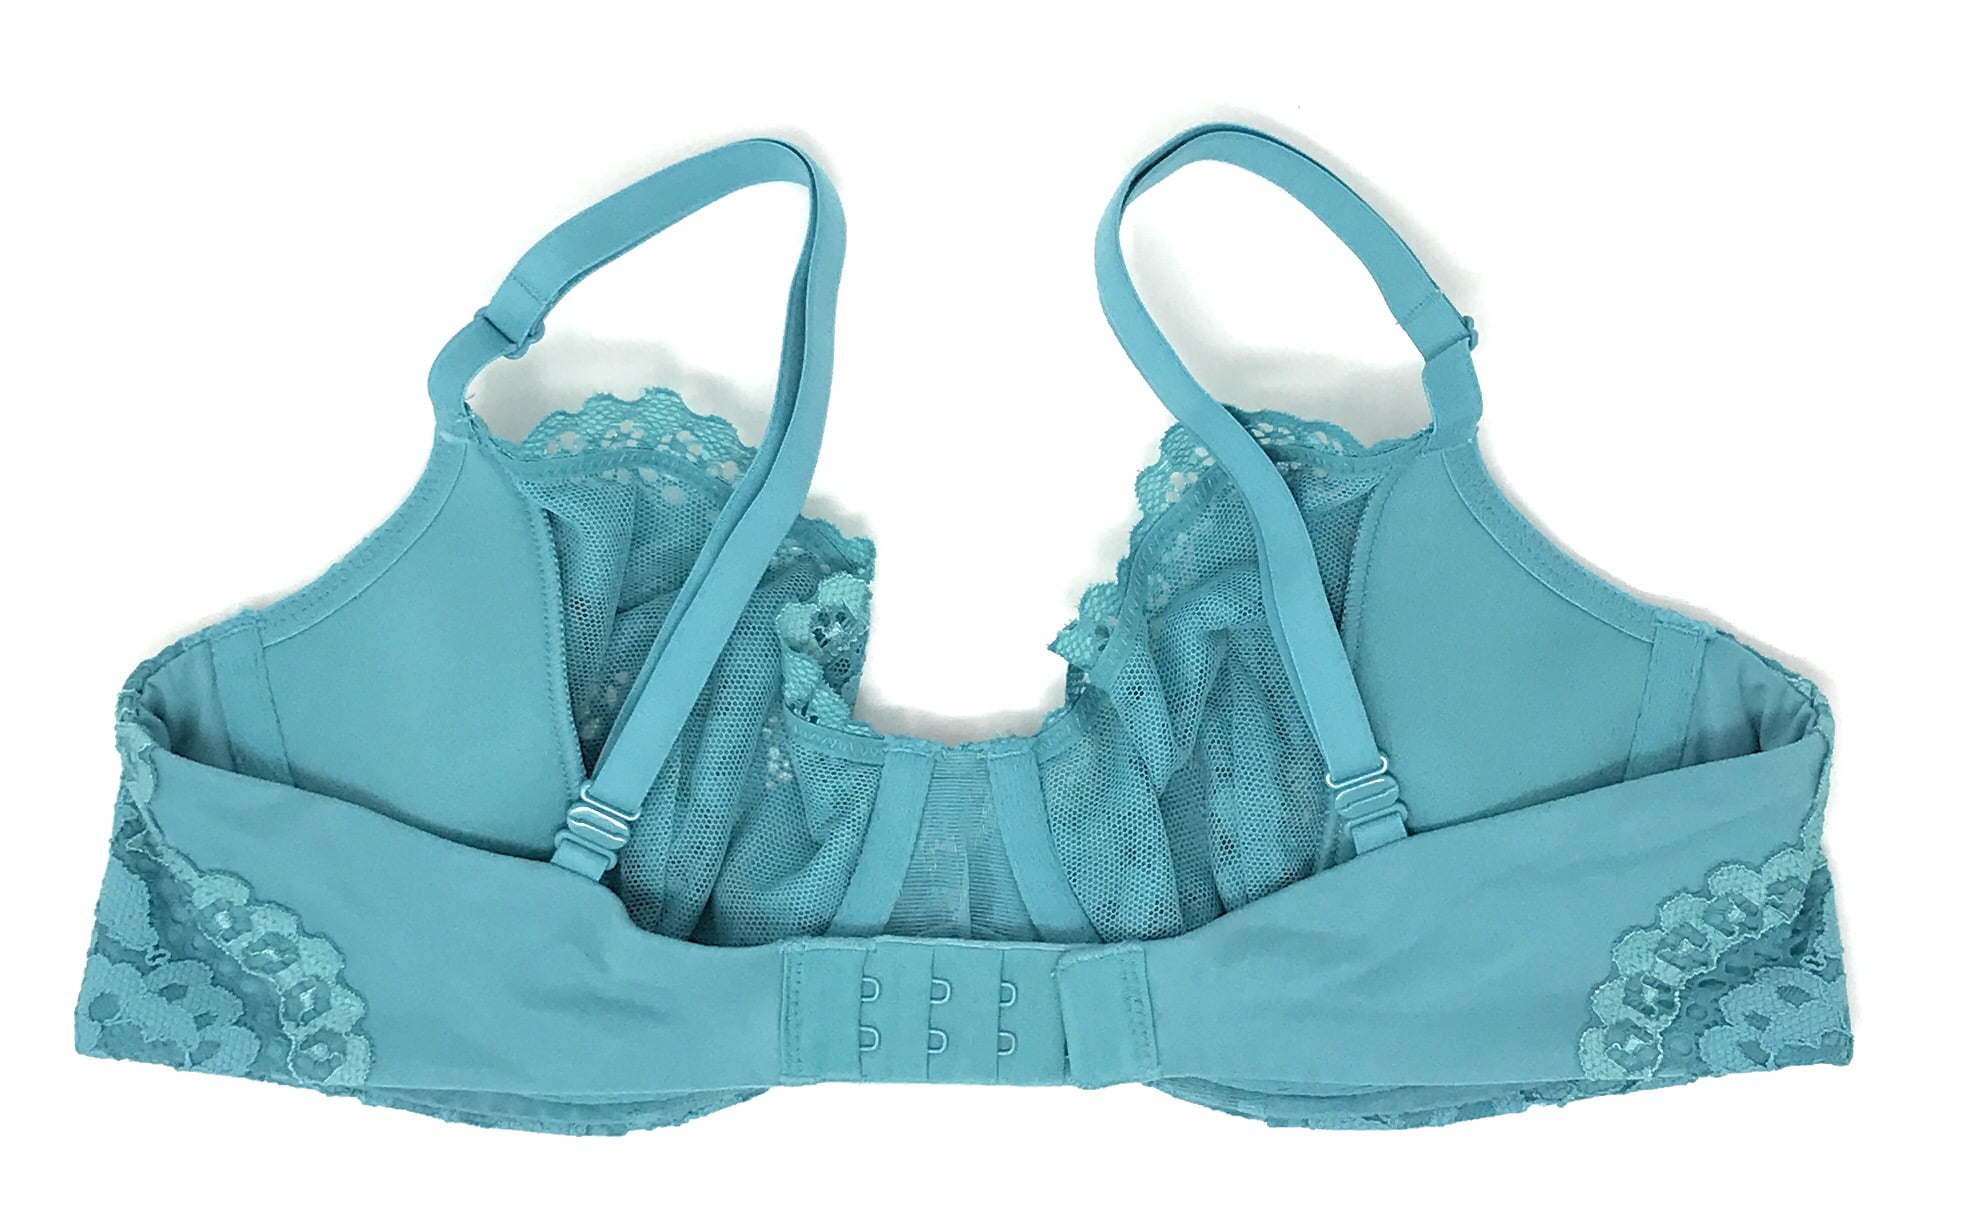 Victoria's Secret Body By Victoria Blue Demi Bra Lightly Lined Underwire  34DD Size undefined - $17 - From Kelsey